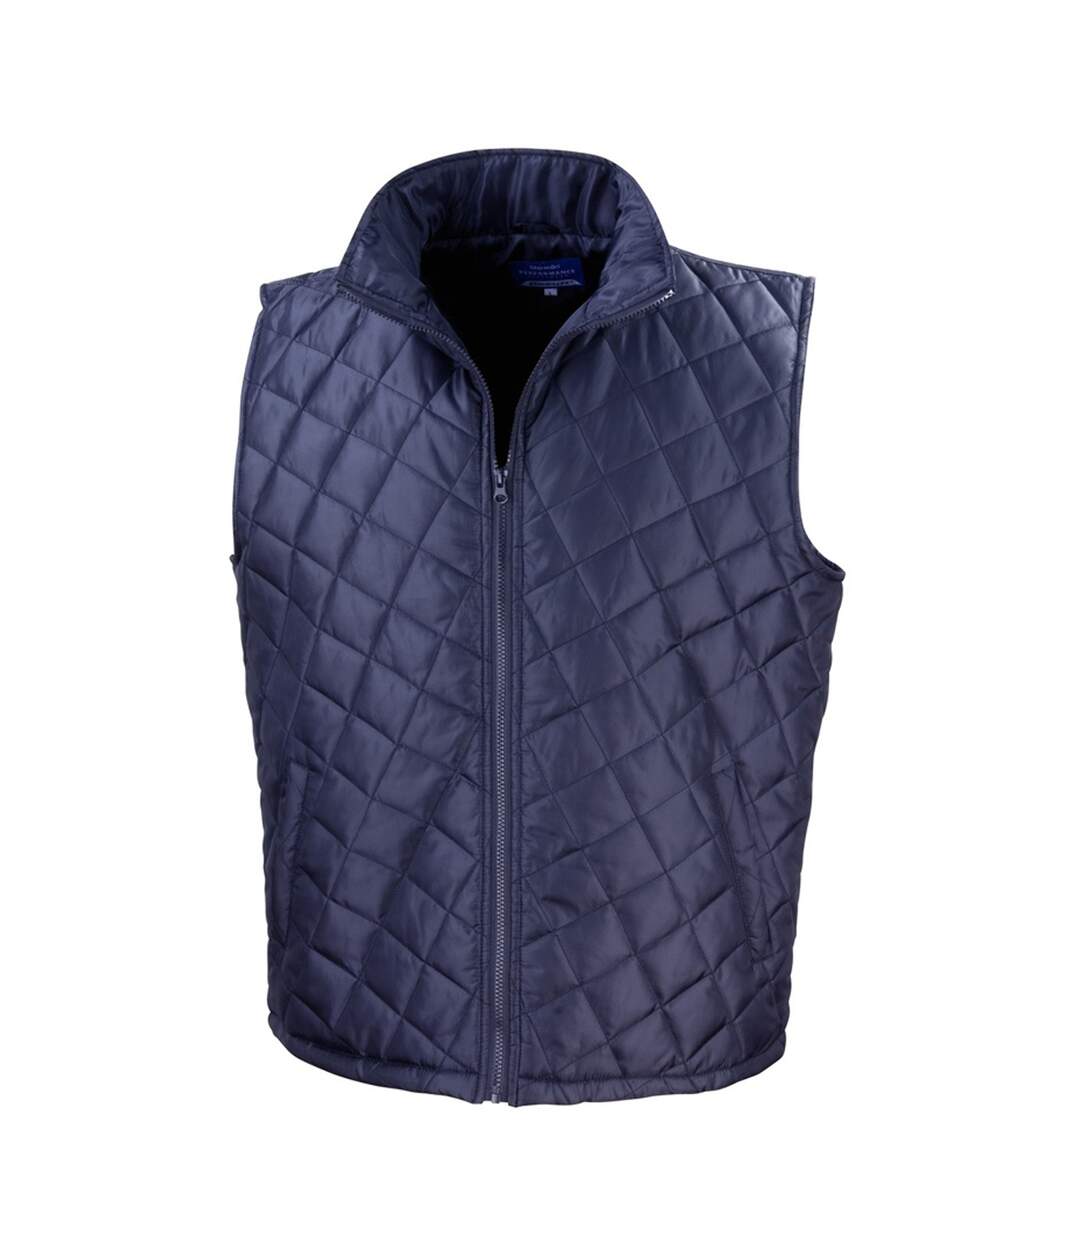 Result Mens Core 3-in-1 Jacket with Quilted Bodywarmer Jacket (Navy Blue)